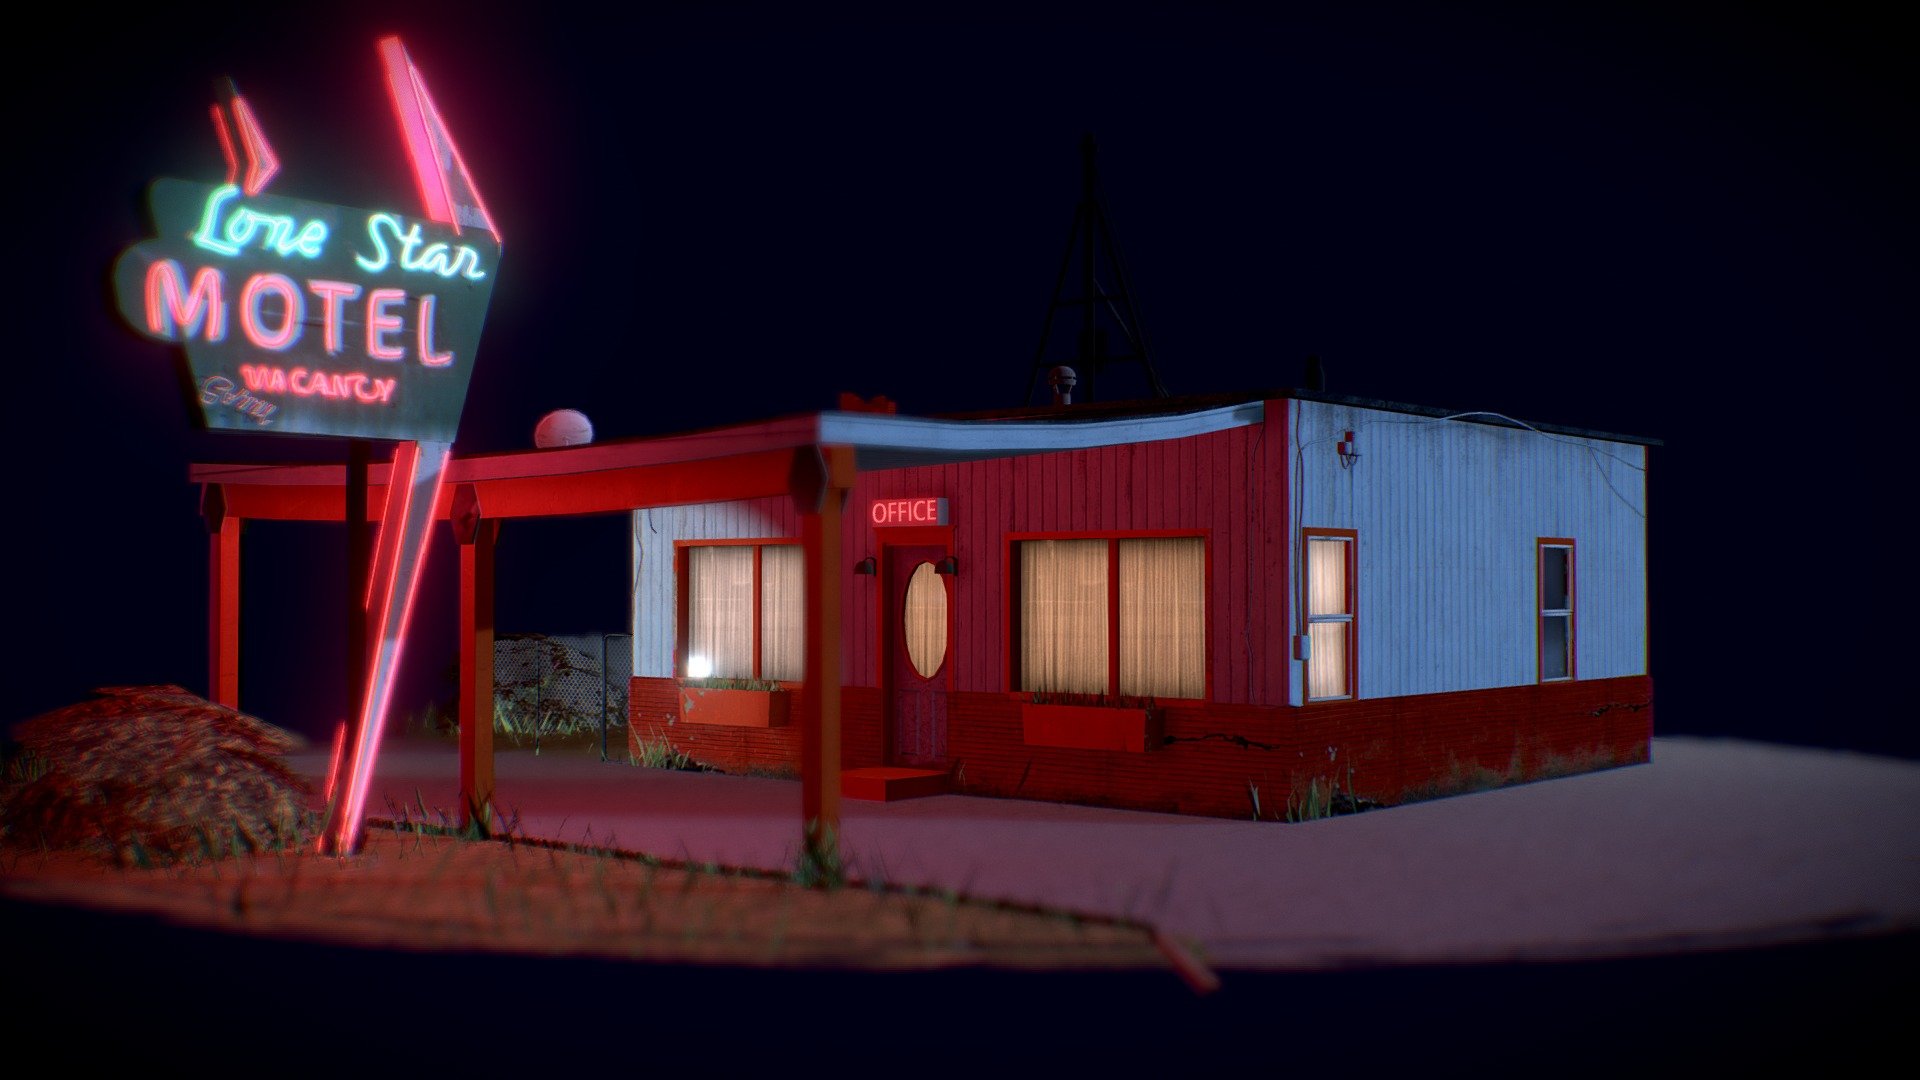 Hi everyone. I'm done a remake of location from Joy Ride movie. It's a Lone Star motel
Enjoy it! - Motel - Download Free 3D model by YD92 3d model